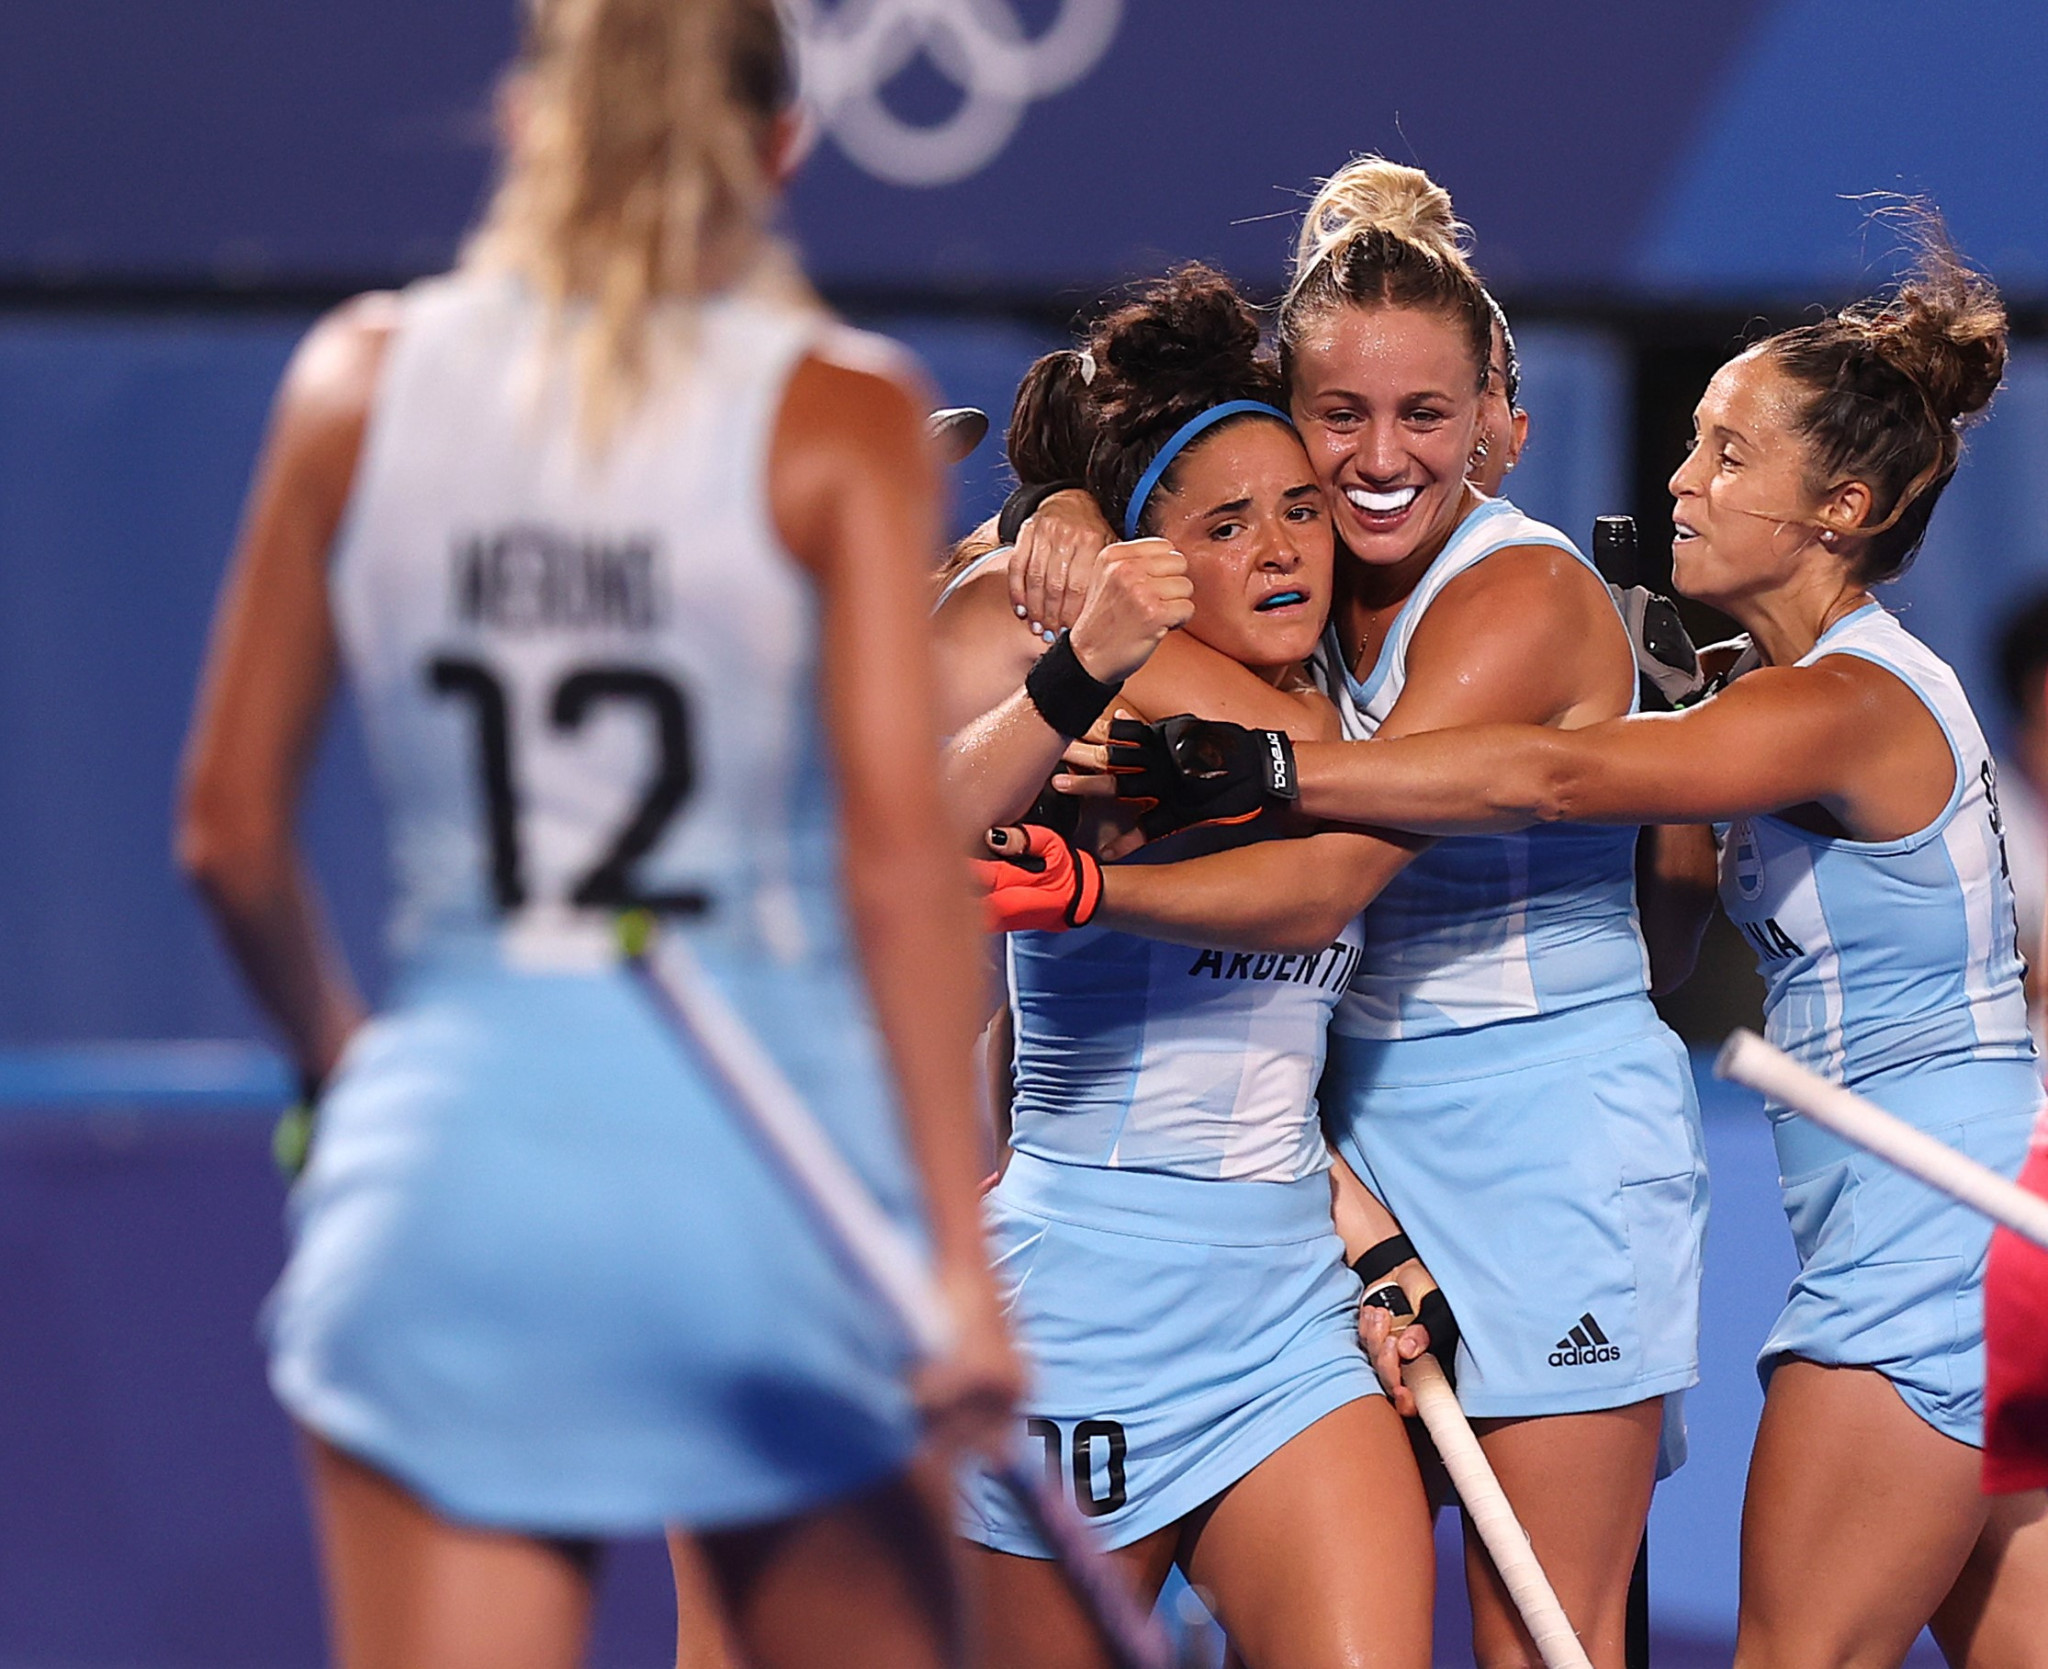 Women's Hockey Pro League leaders Argentina beat England 5-2 once again